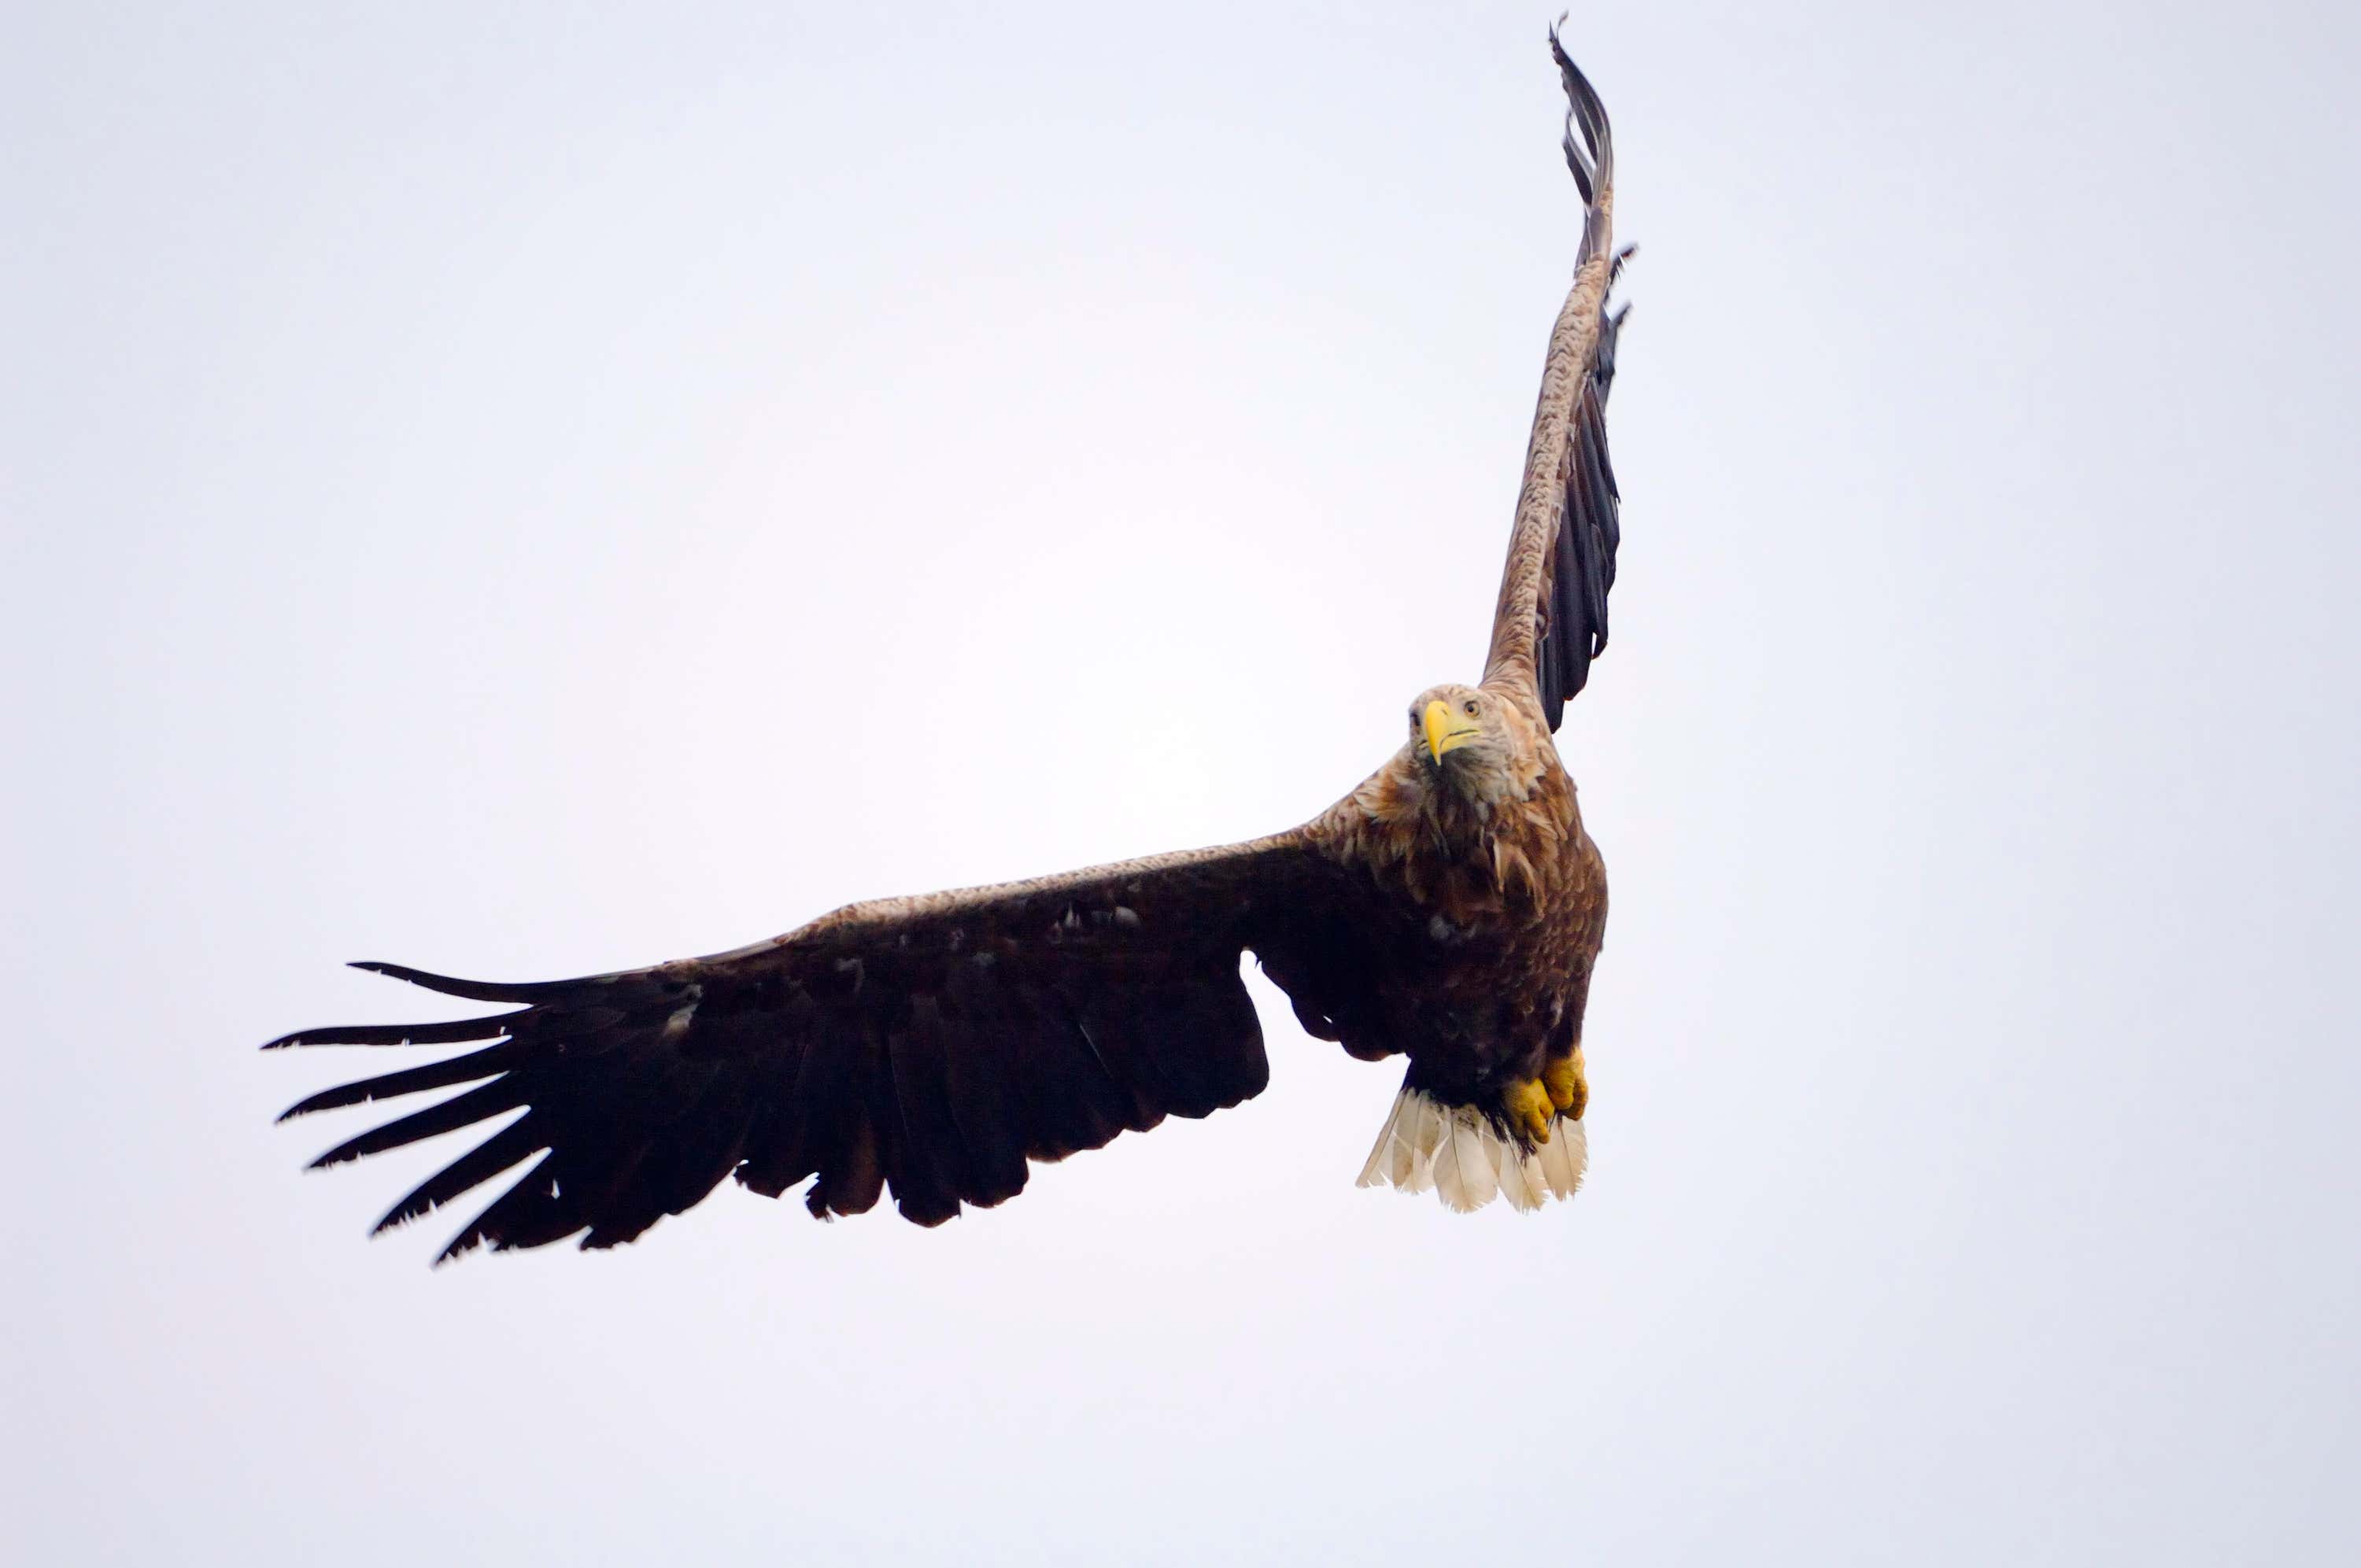 Sea eagles were reintroduced to Scotland in the 1970s.